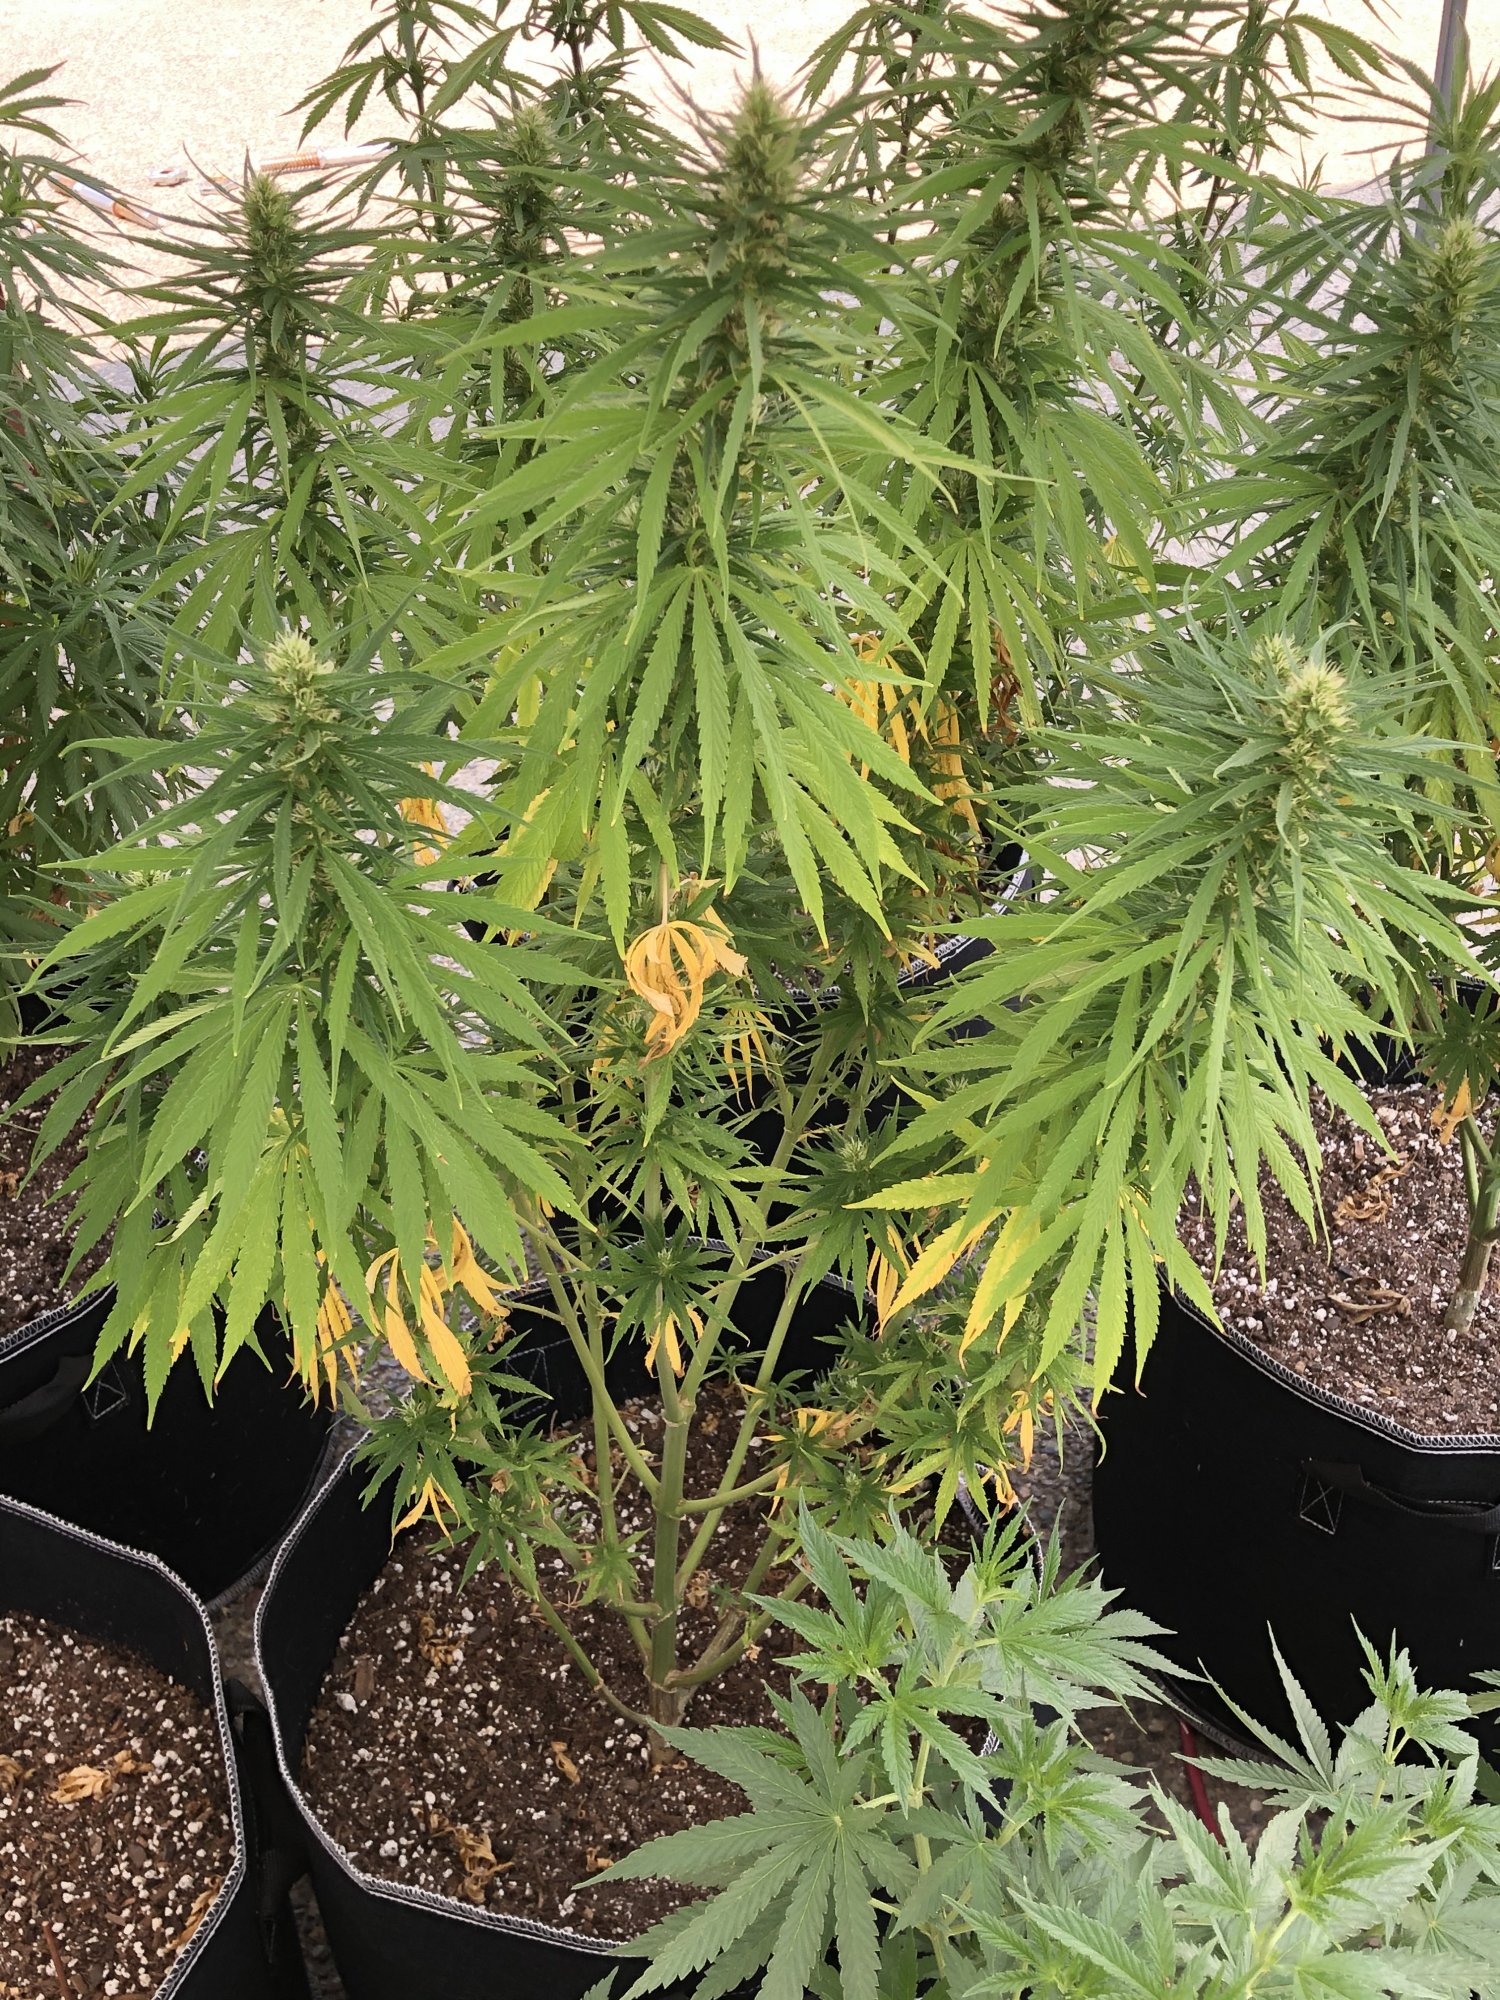 Black spots on leaves and stems please help 6